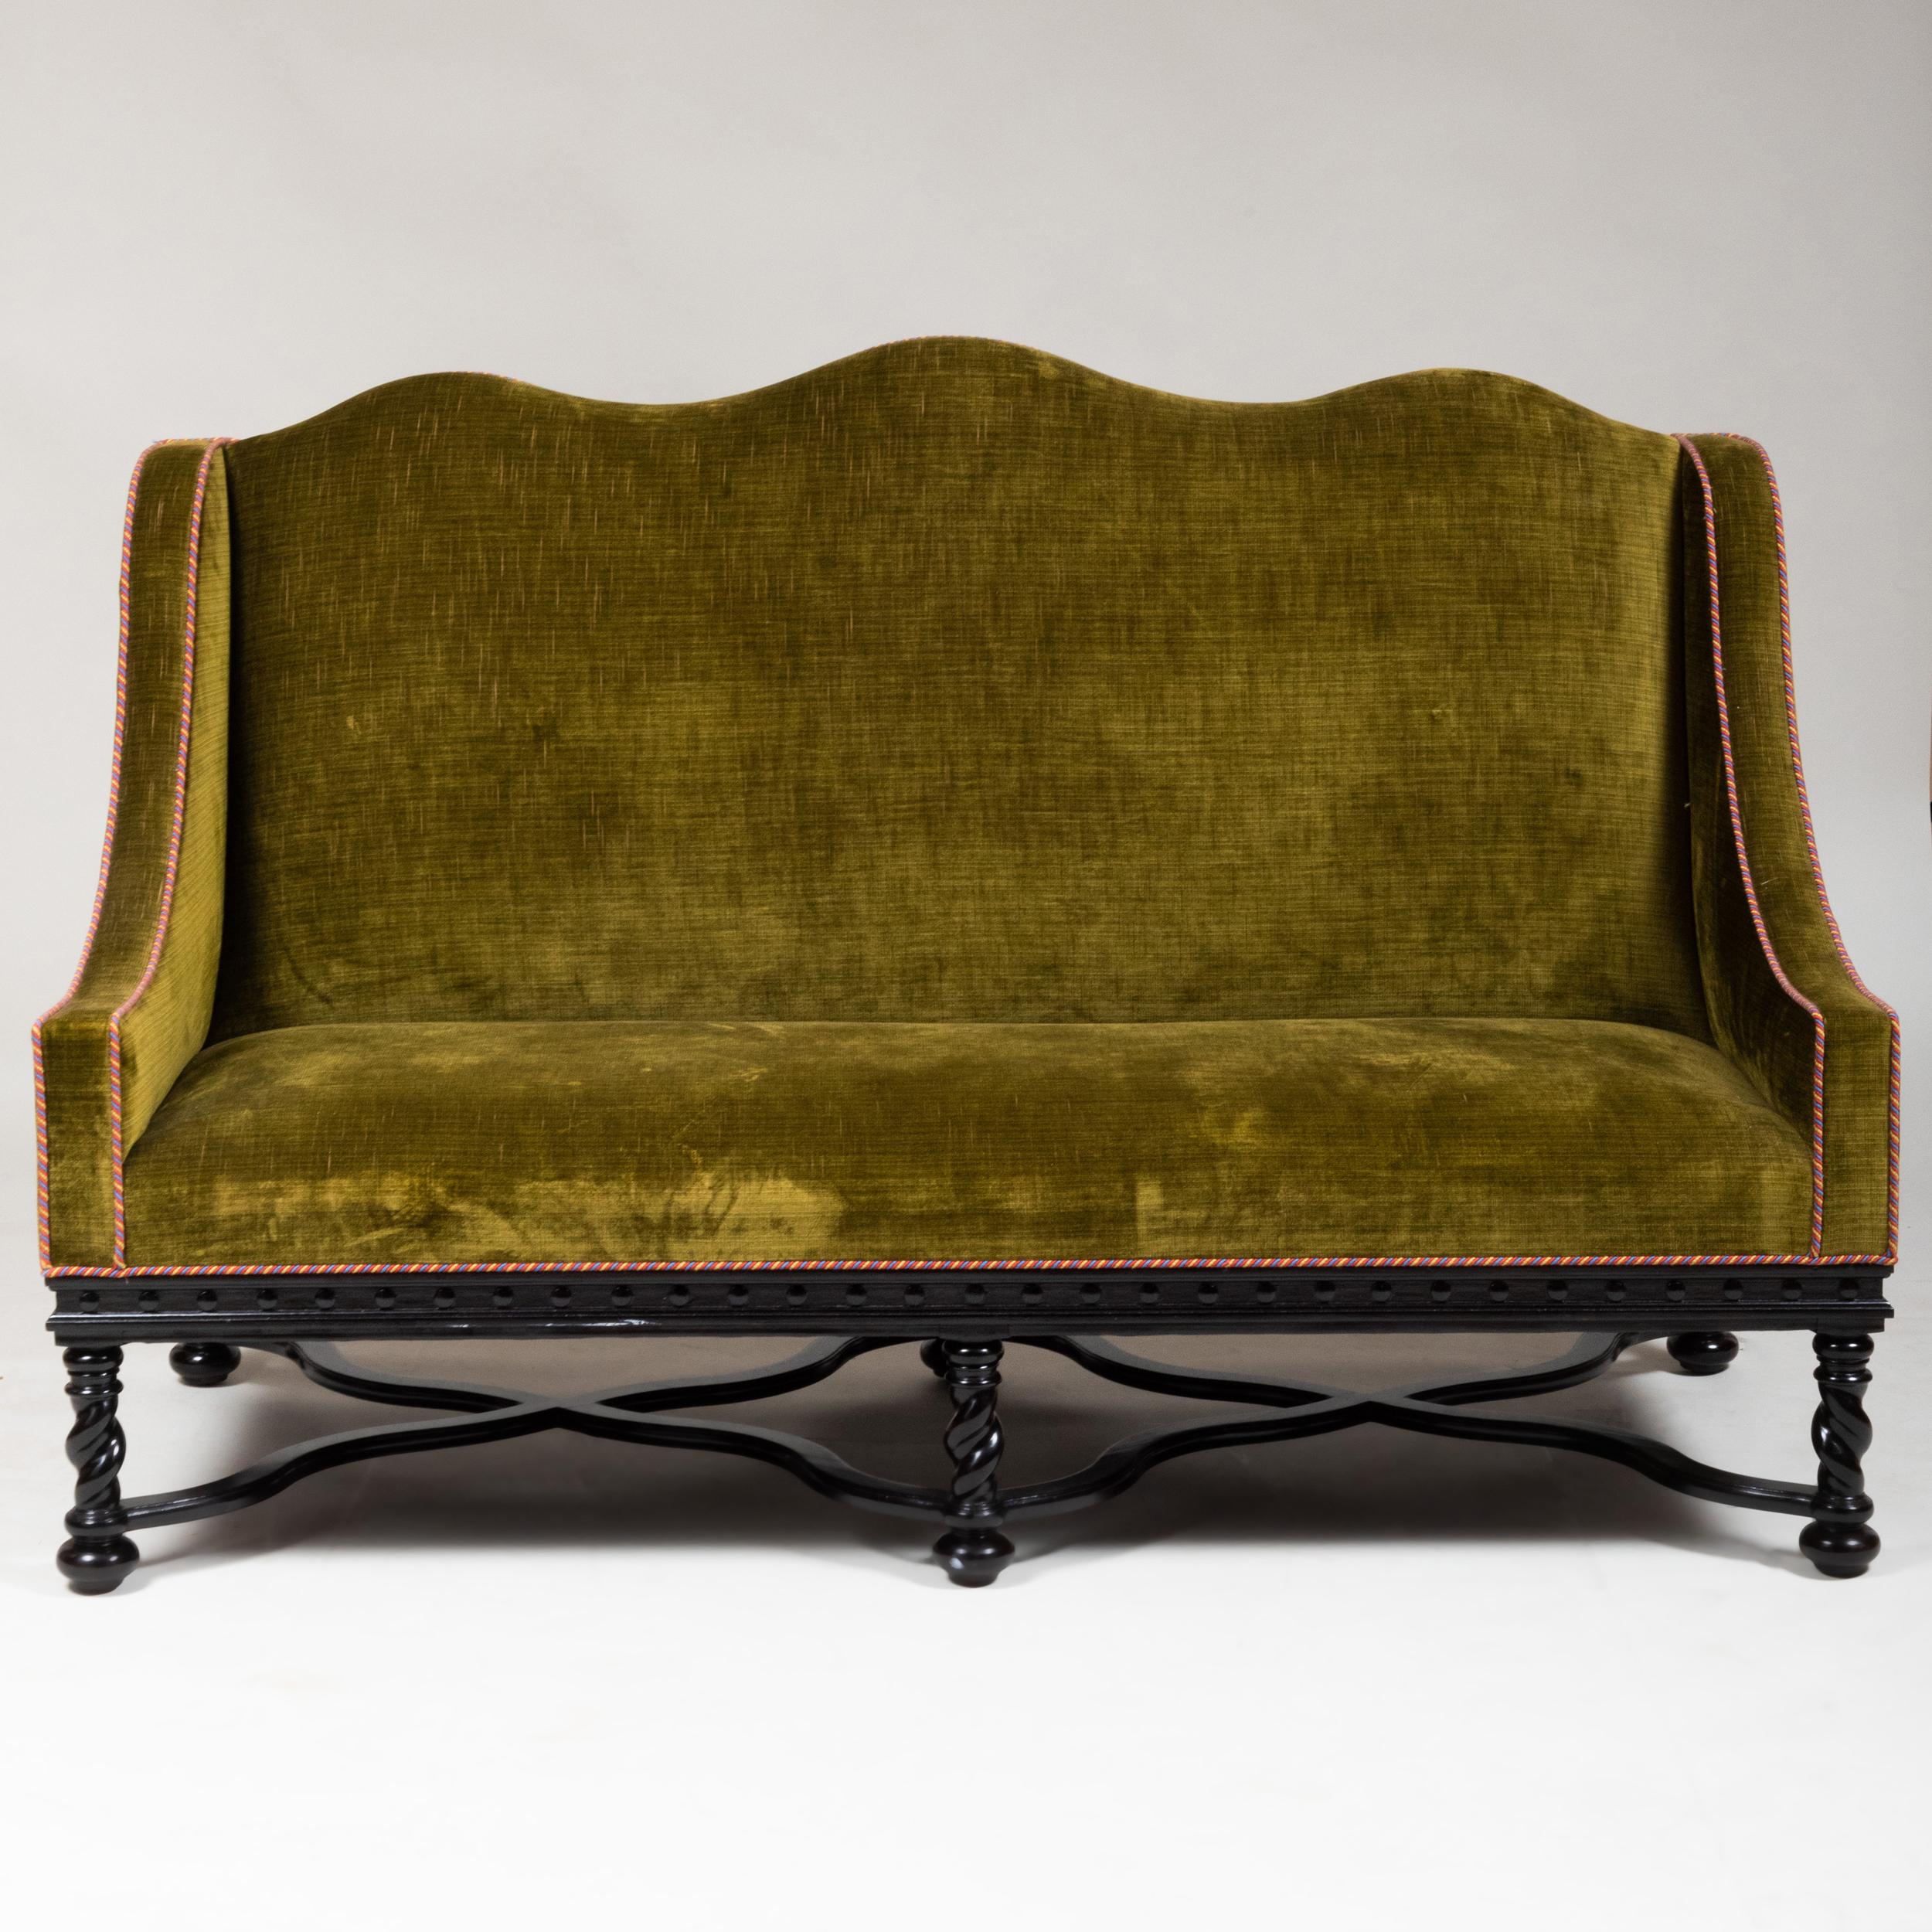 Pair of beautiful Baroque style, camel back sofas, with elegant ebonized frames and turned legs, 
upholstered in an olive green velvet still in good condition.